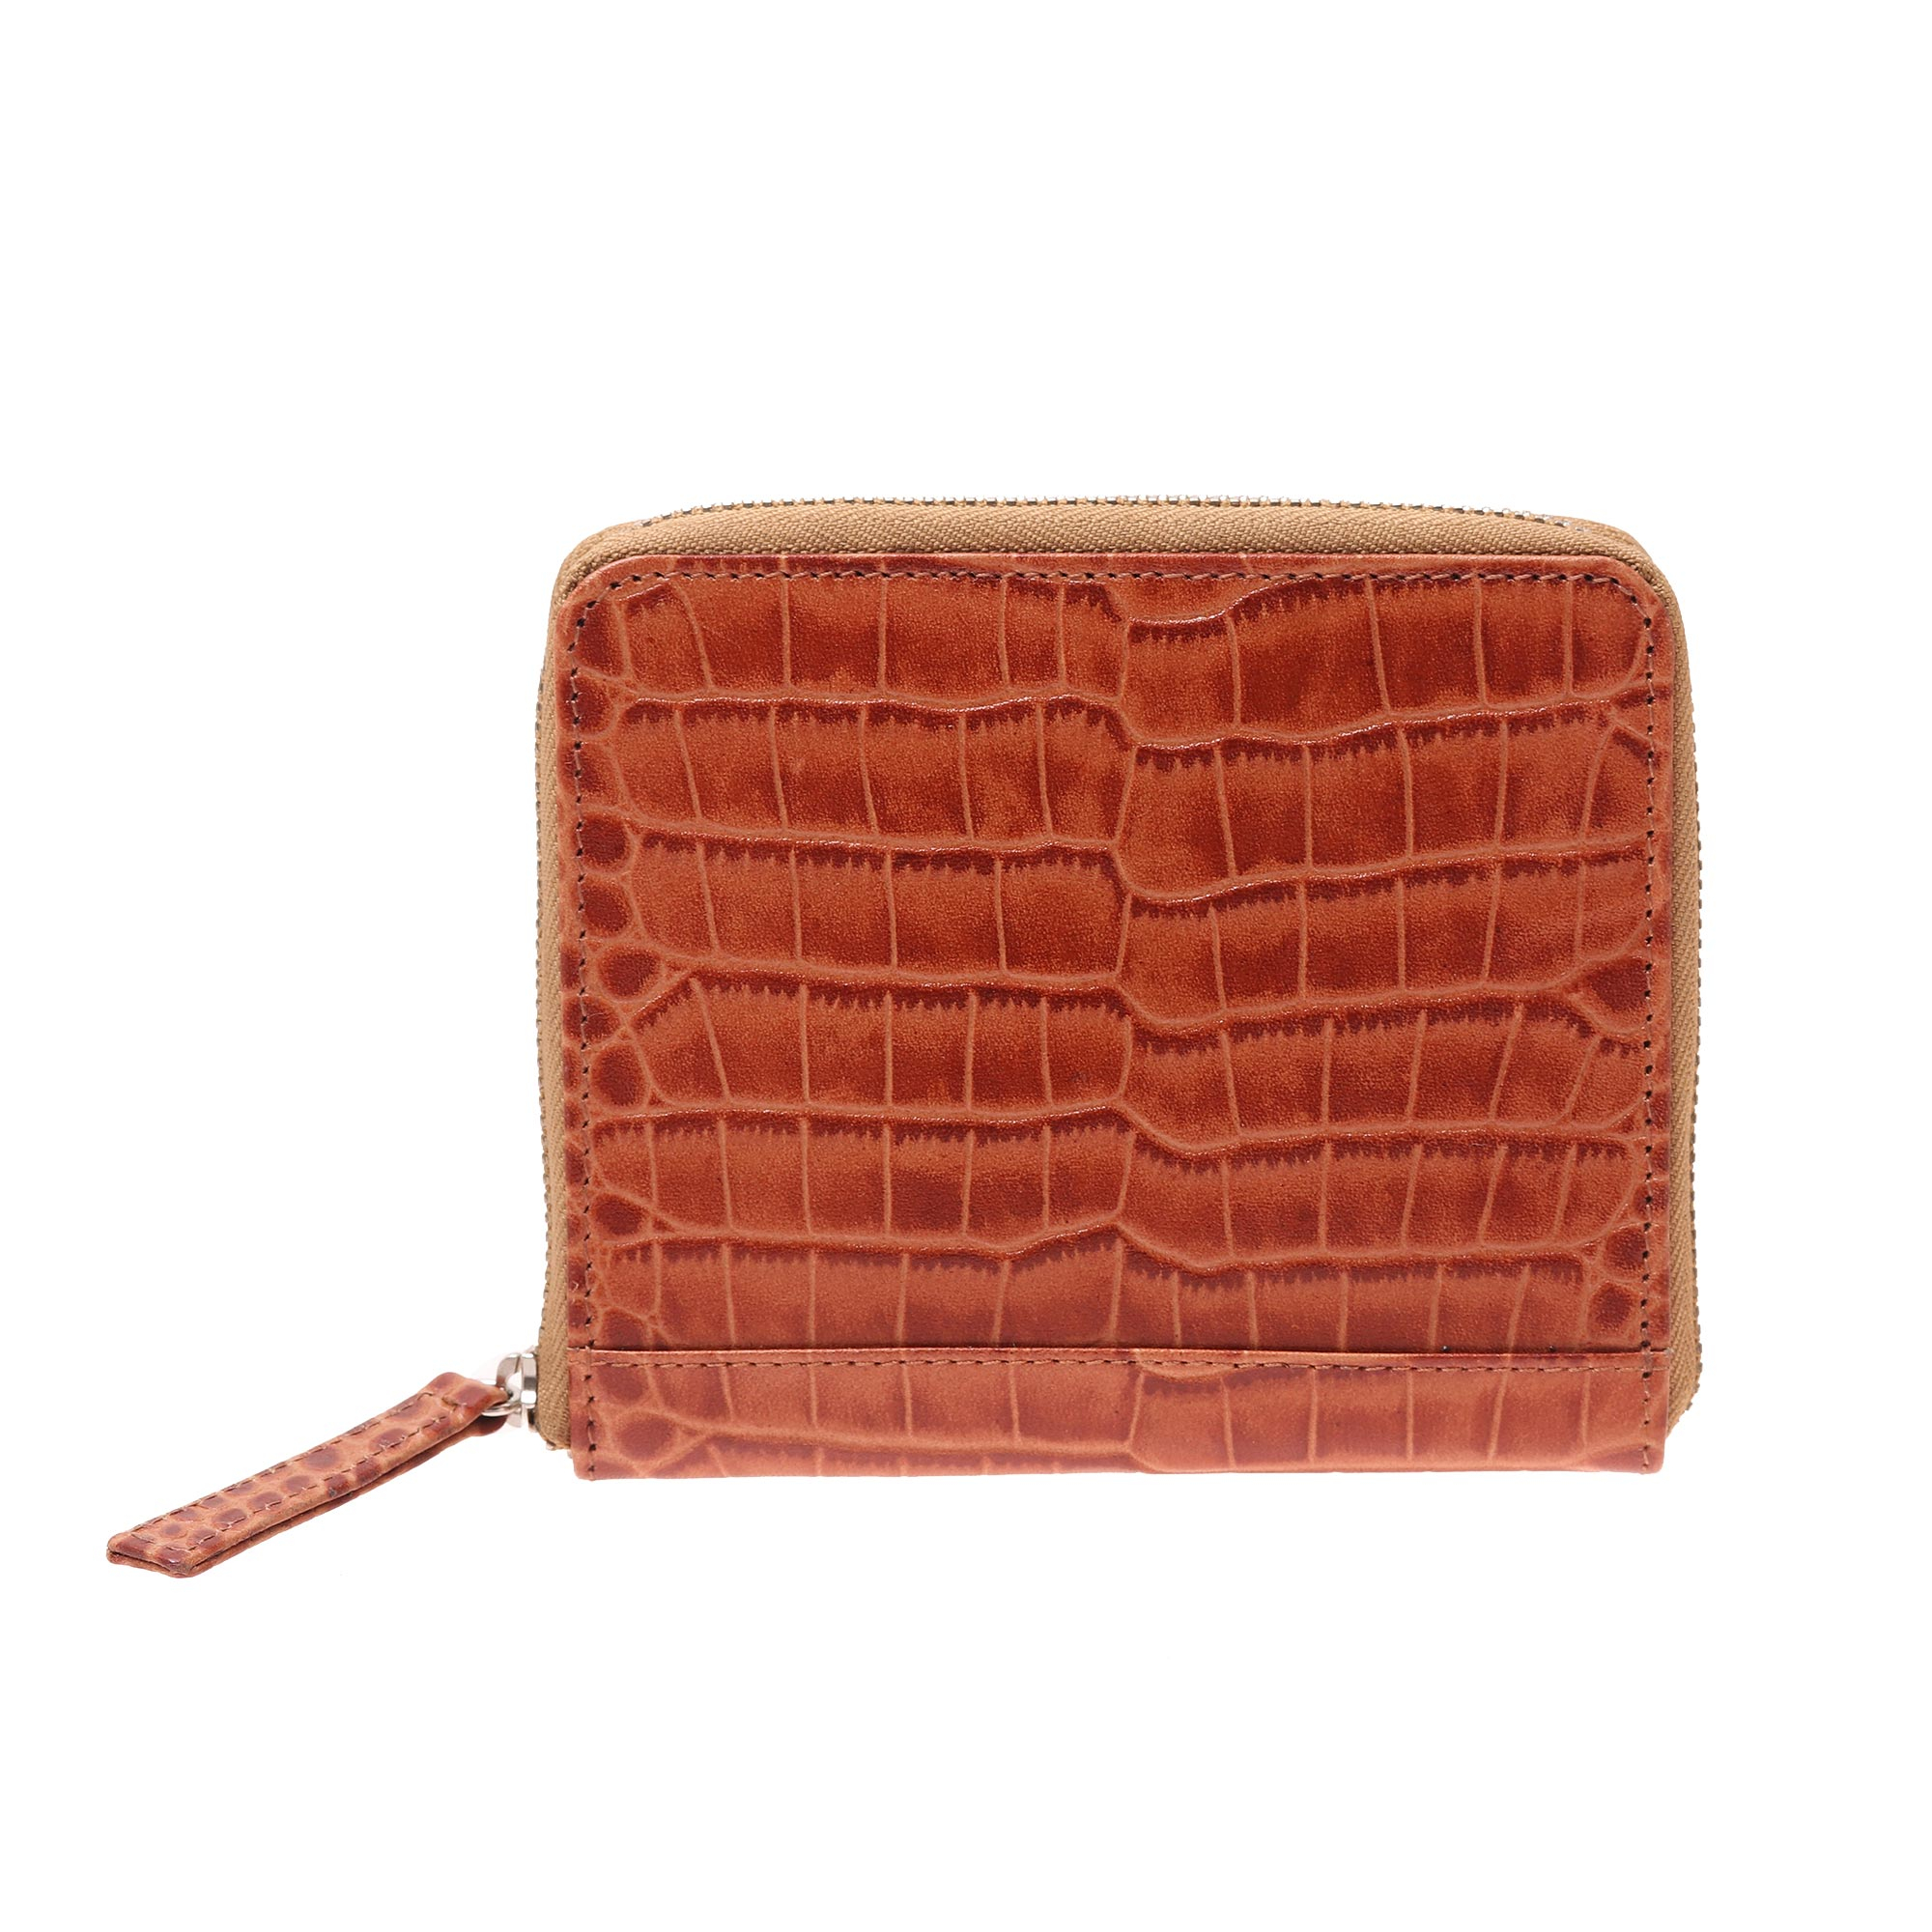 UNICEF Market | Russet Brown Leather Zippered Wallet with Crocodile ...